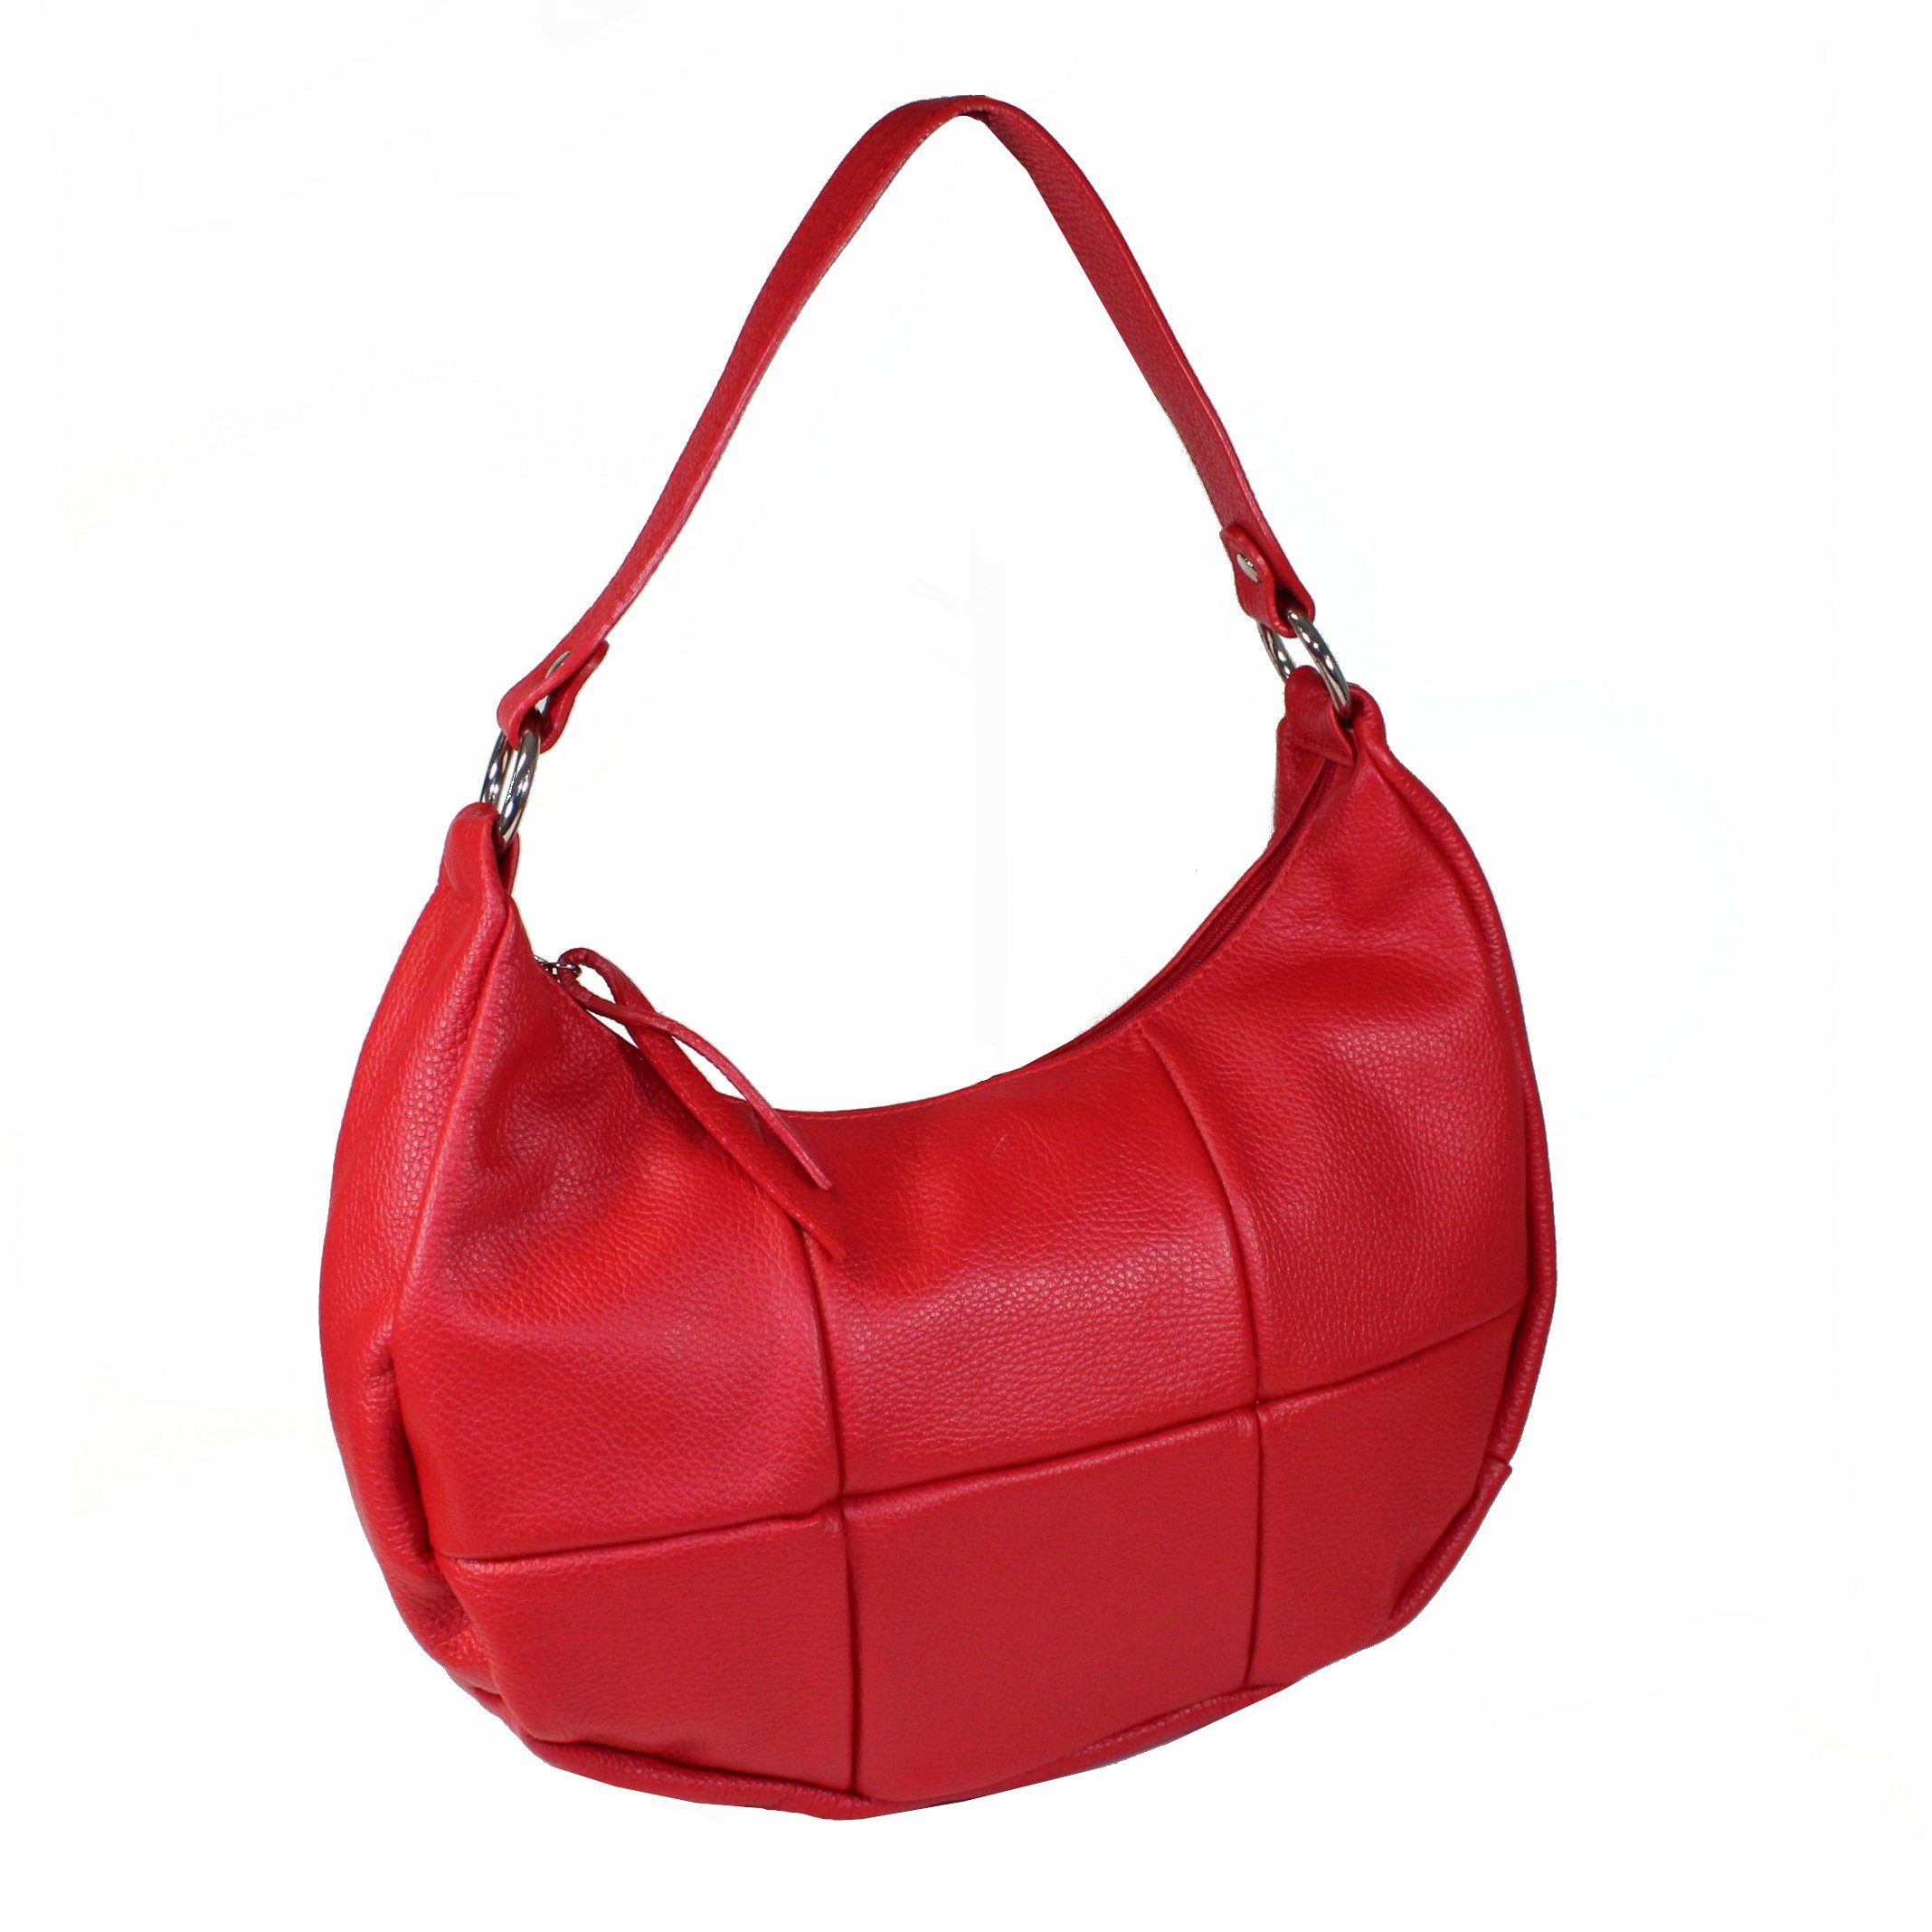 Made in fs-bags fs7219, Handtasche Rot Patchwork Optik, Italy